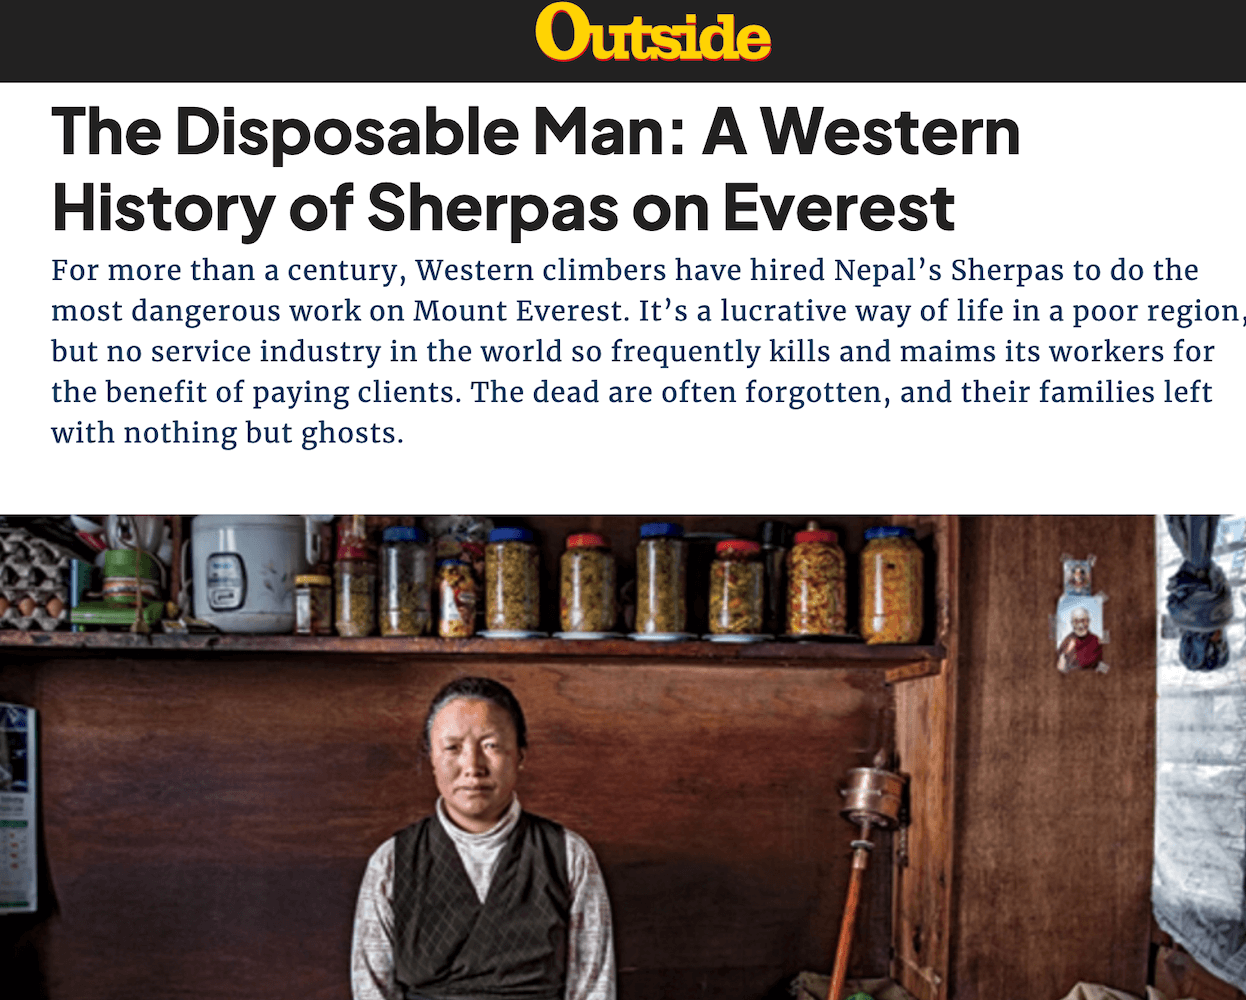 The Disposable Man: A Western History of Sherpas on Everest (2013)